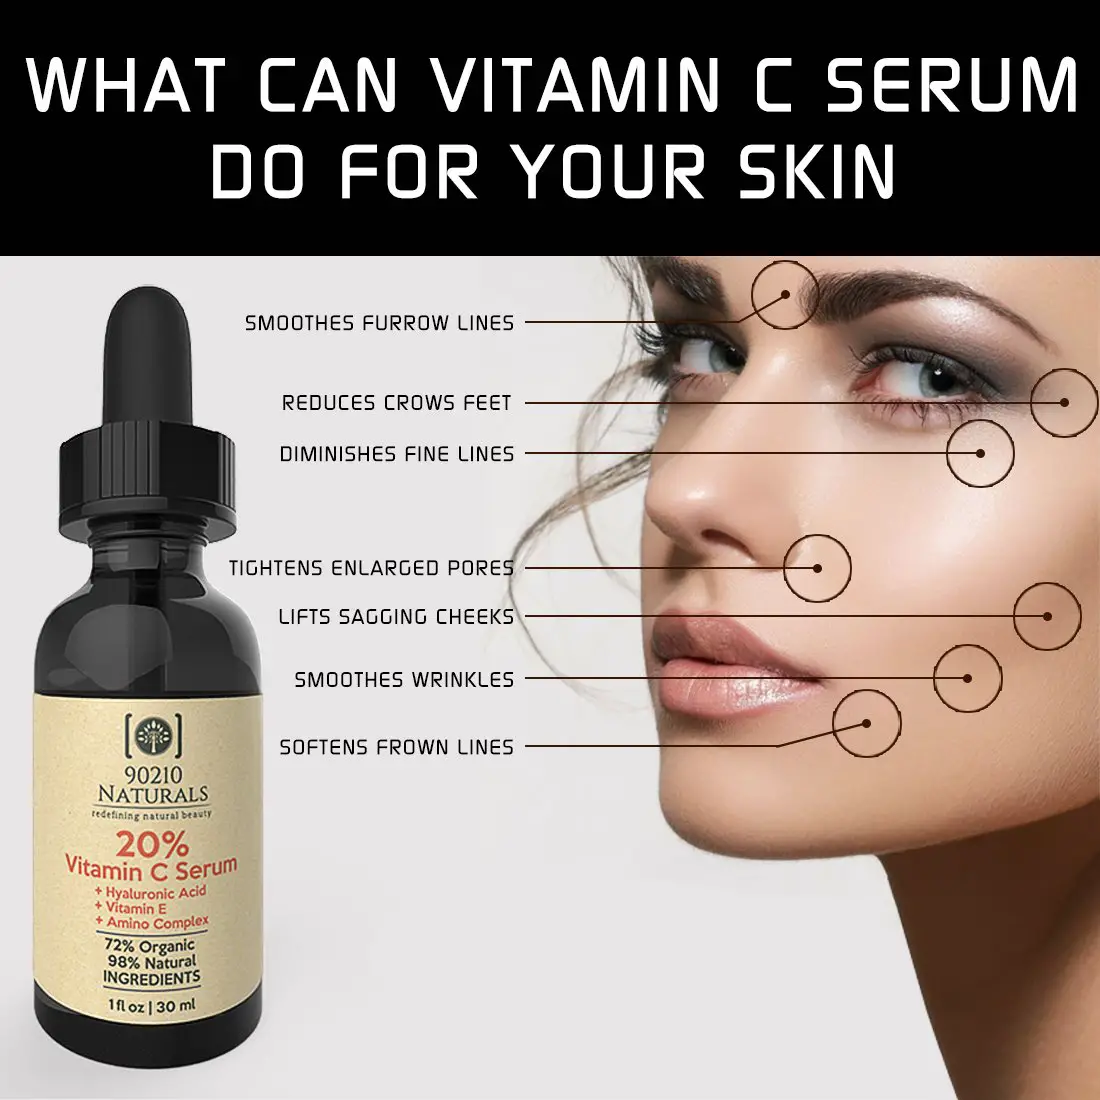 90210 Naturals Releases Their Hot New Vitamin C Serum For ...